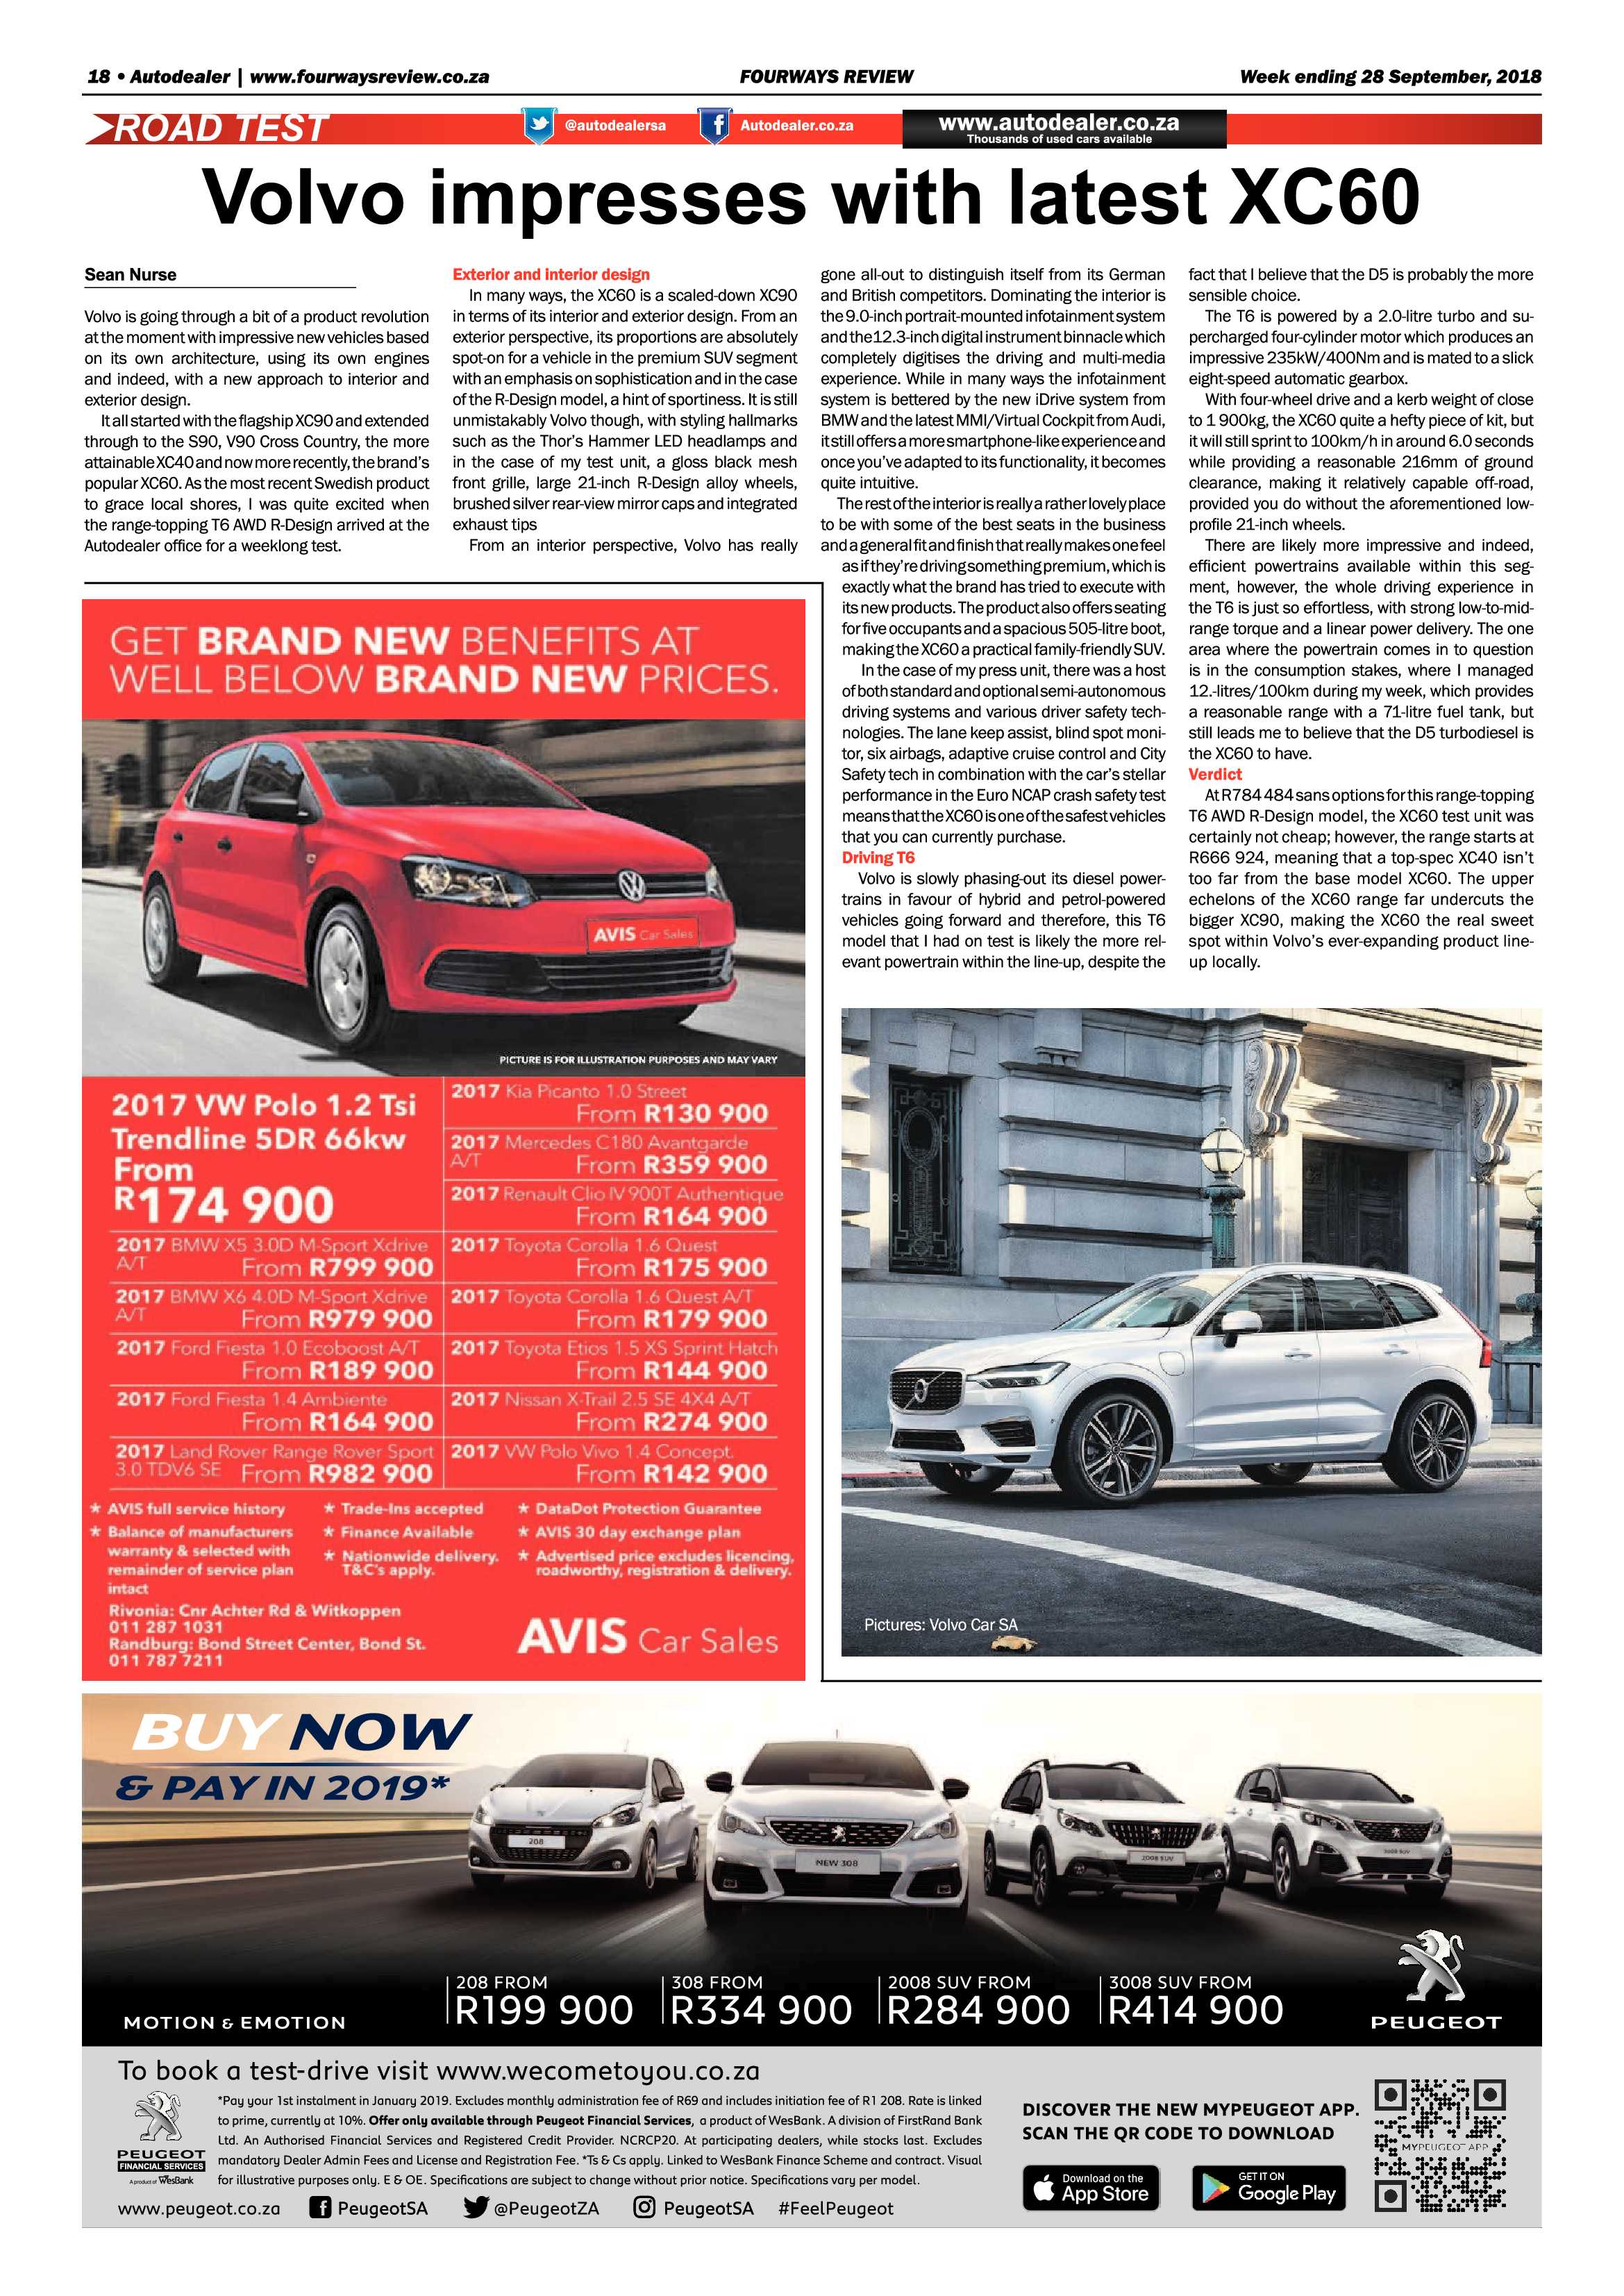 Fourways Review 28 September, 2018 page 18